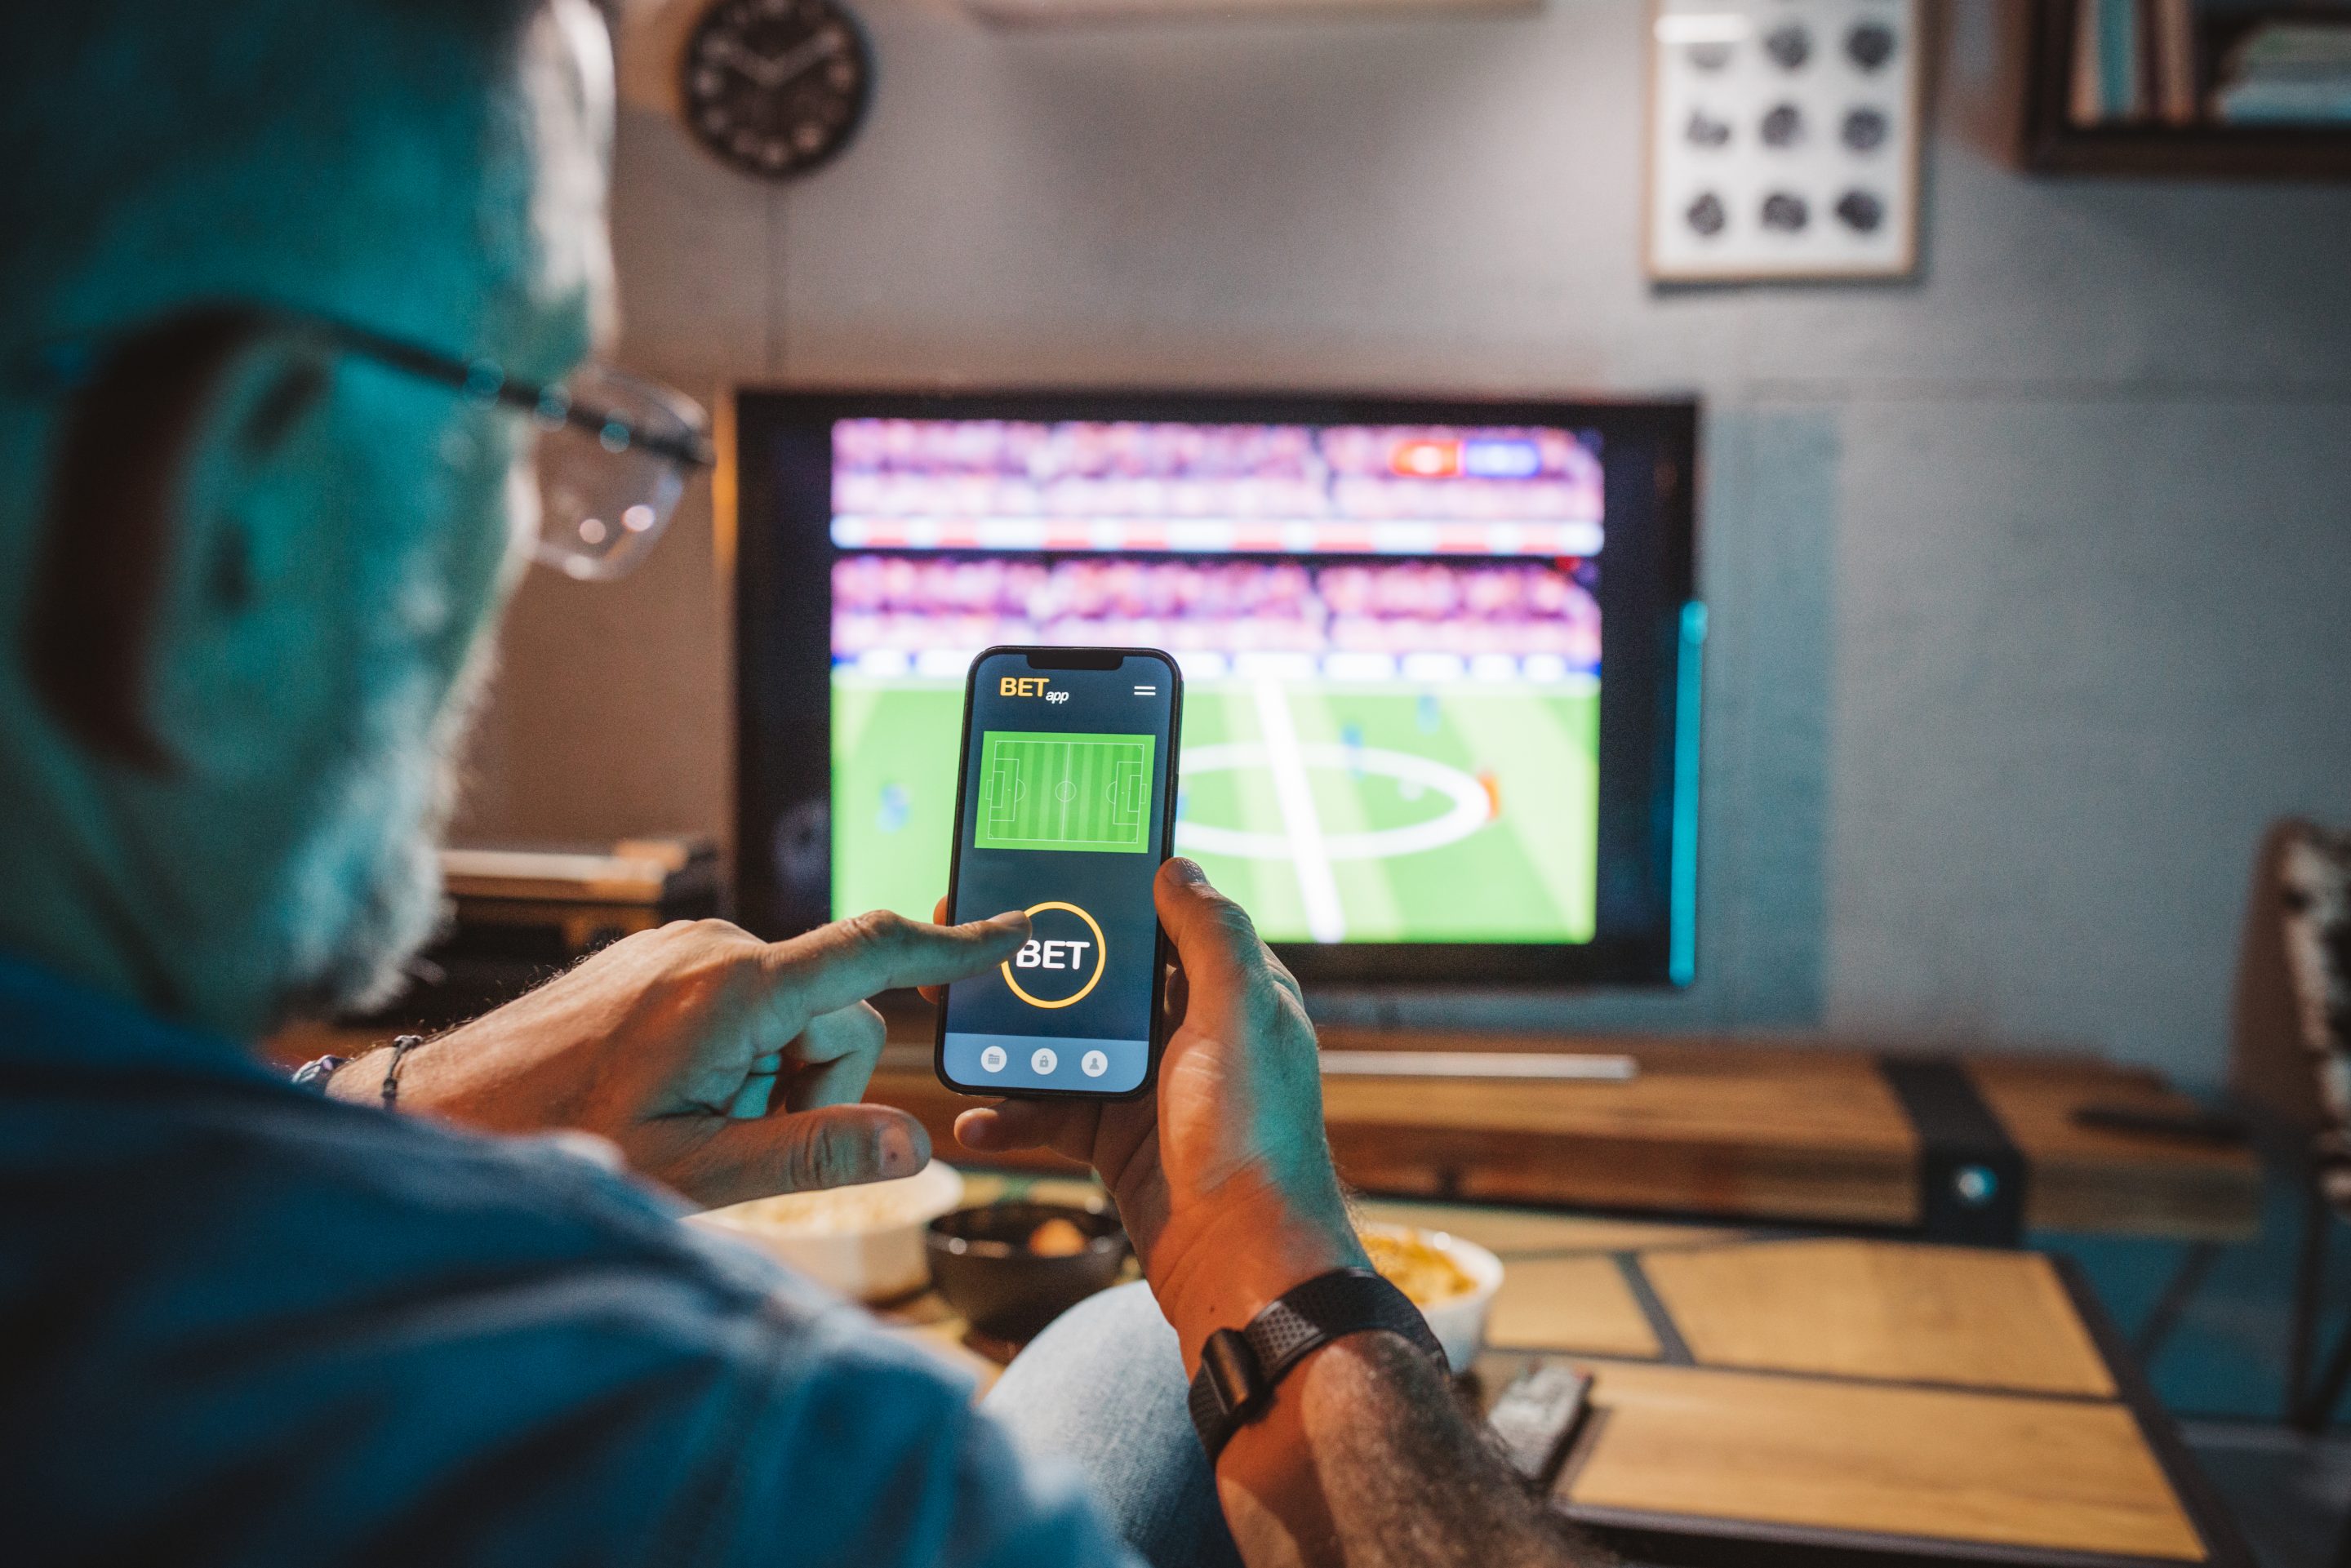 Photo: how do sports betting apps work